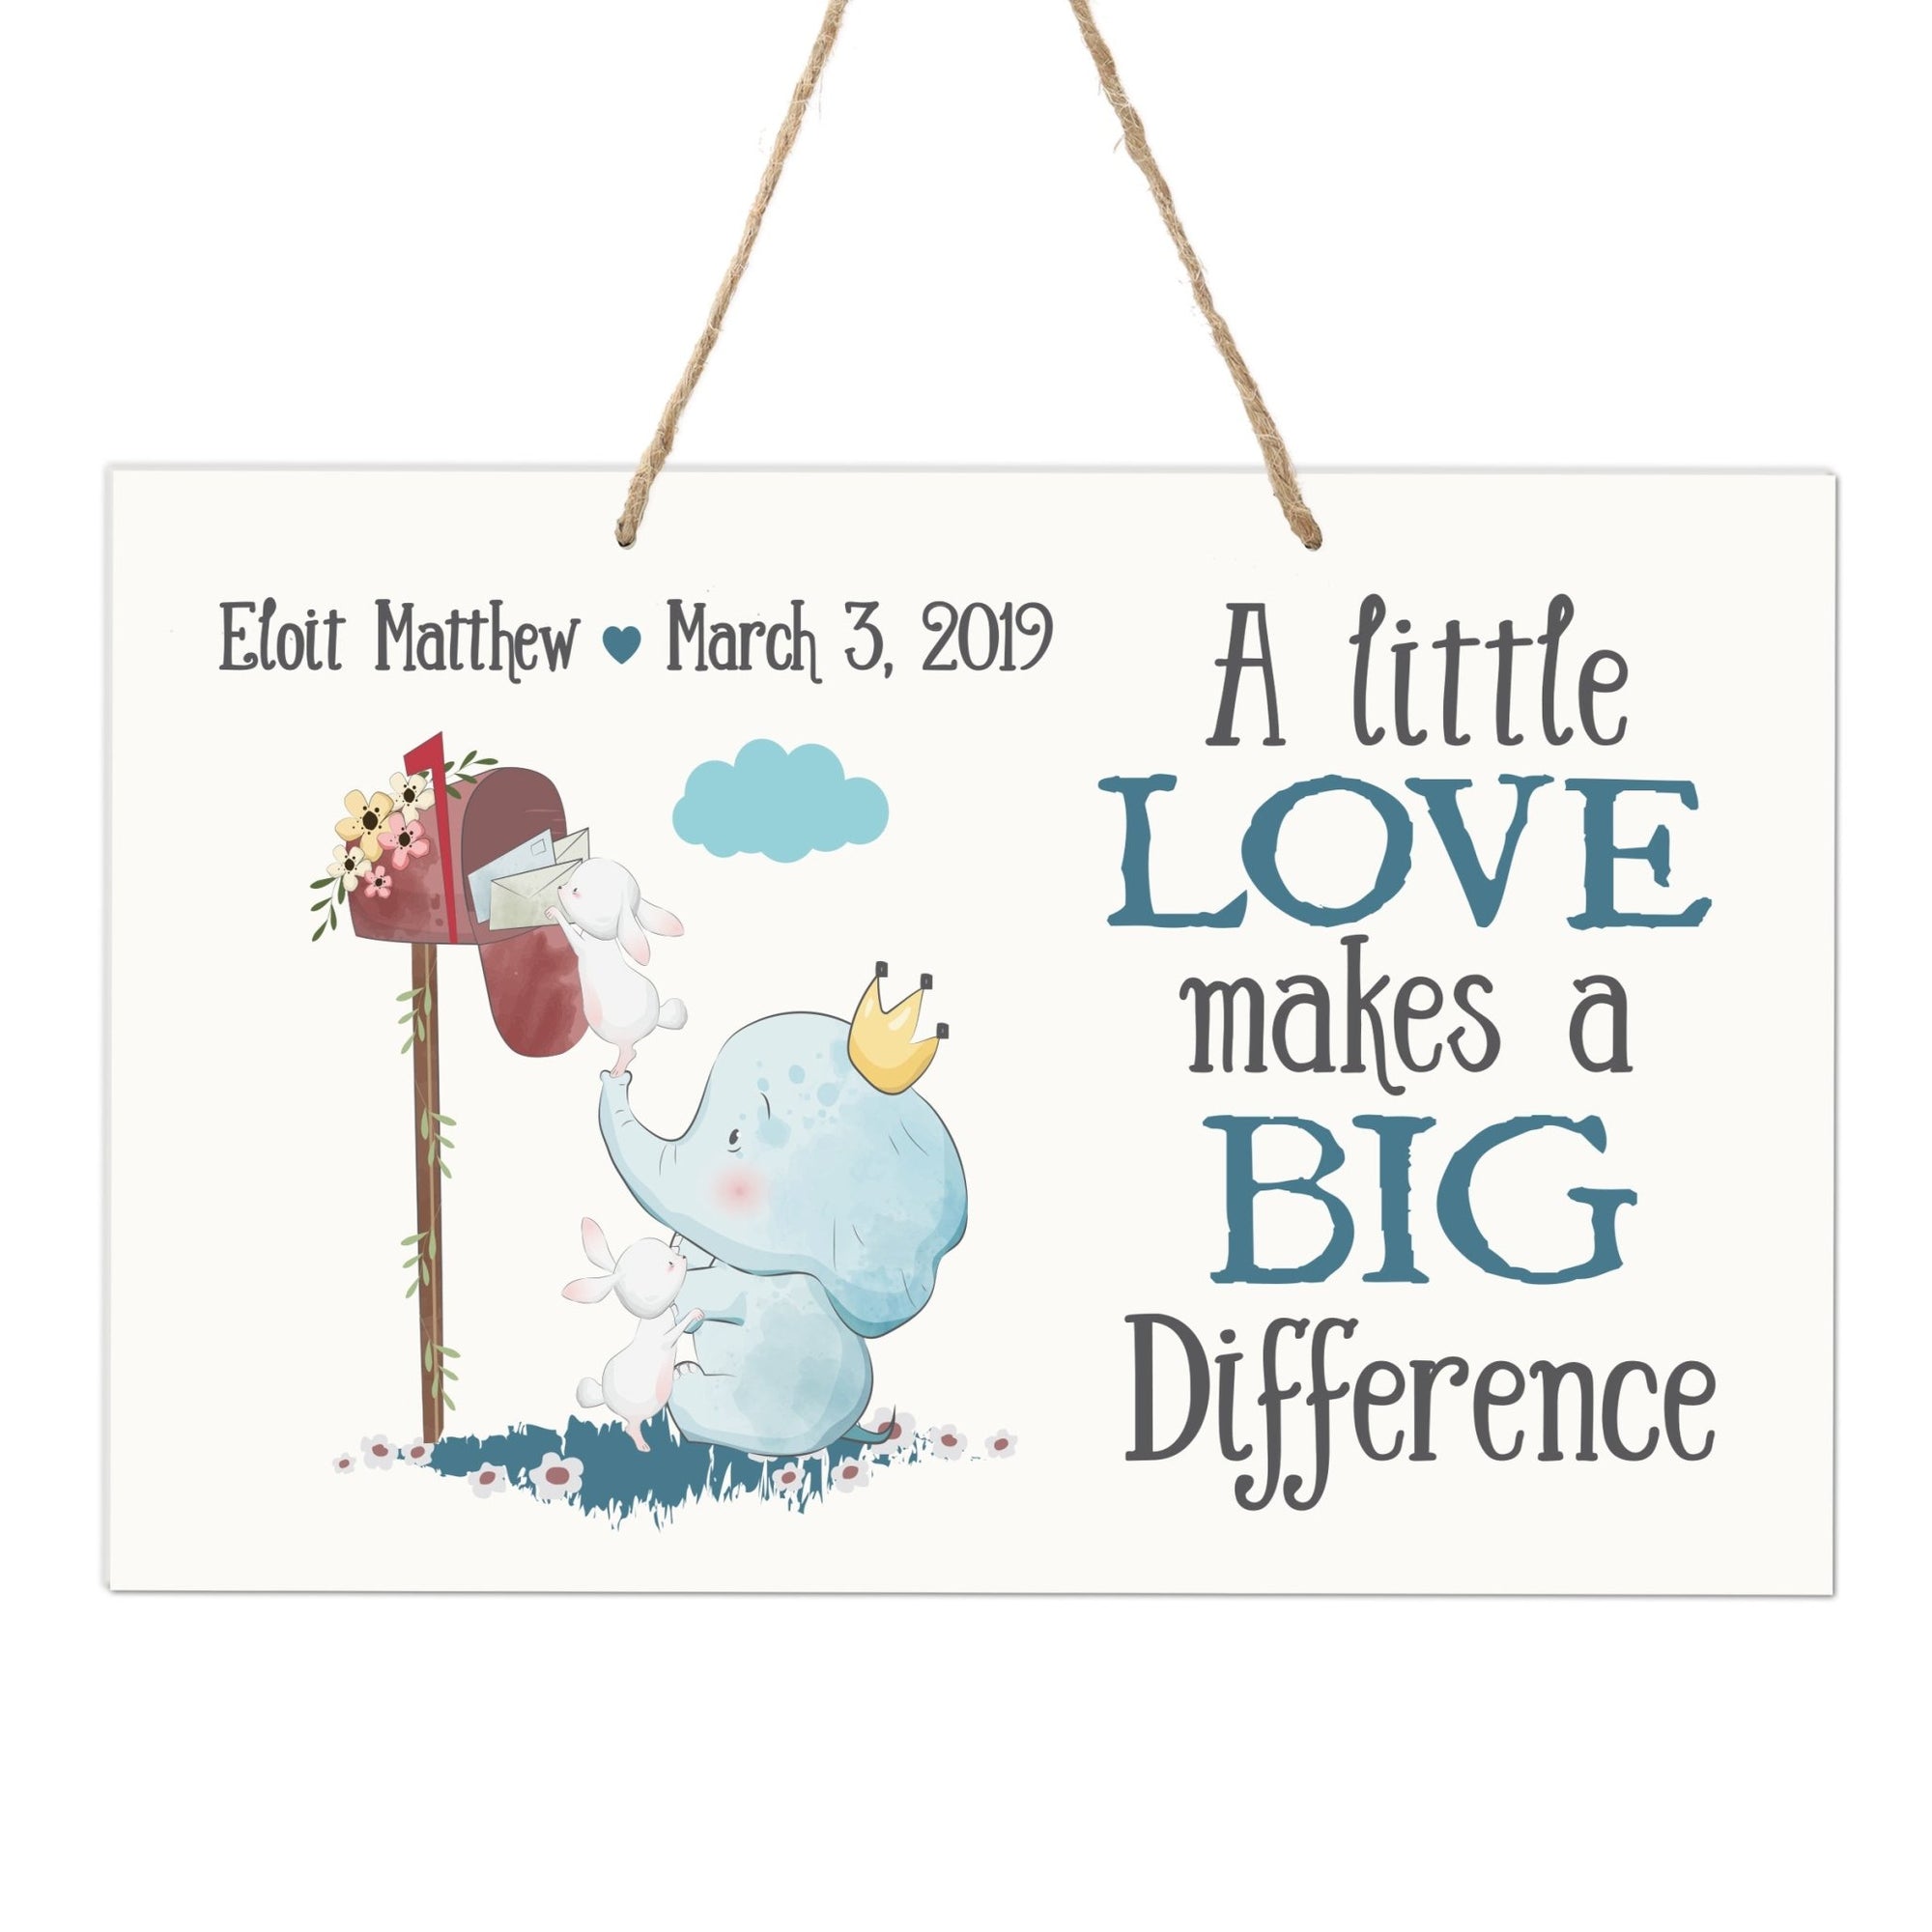 Personalized Wall Decor For Nursery Boys Bedroom Hanging Wall Art - LifeSong Milestones